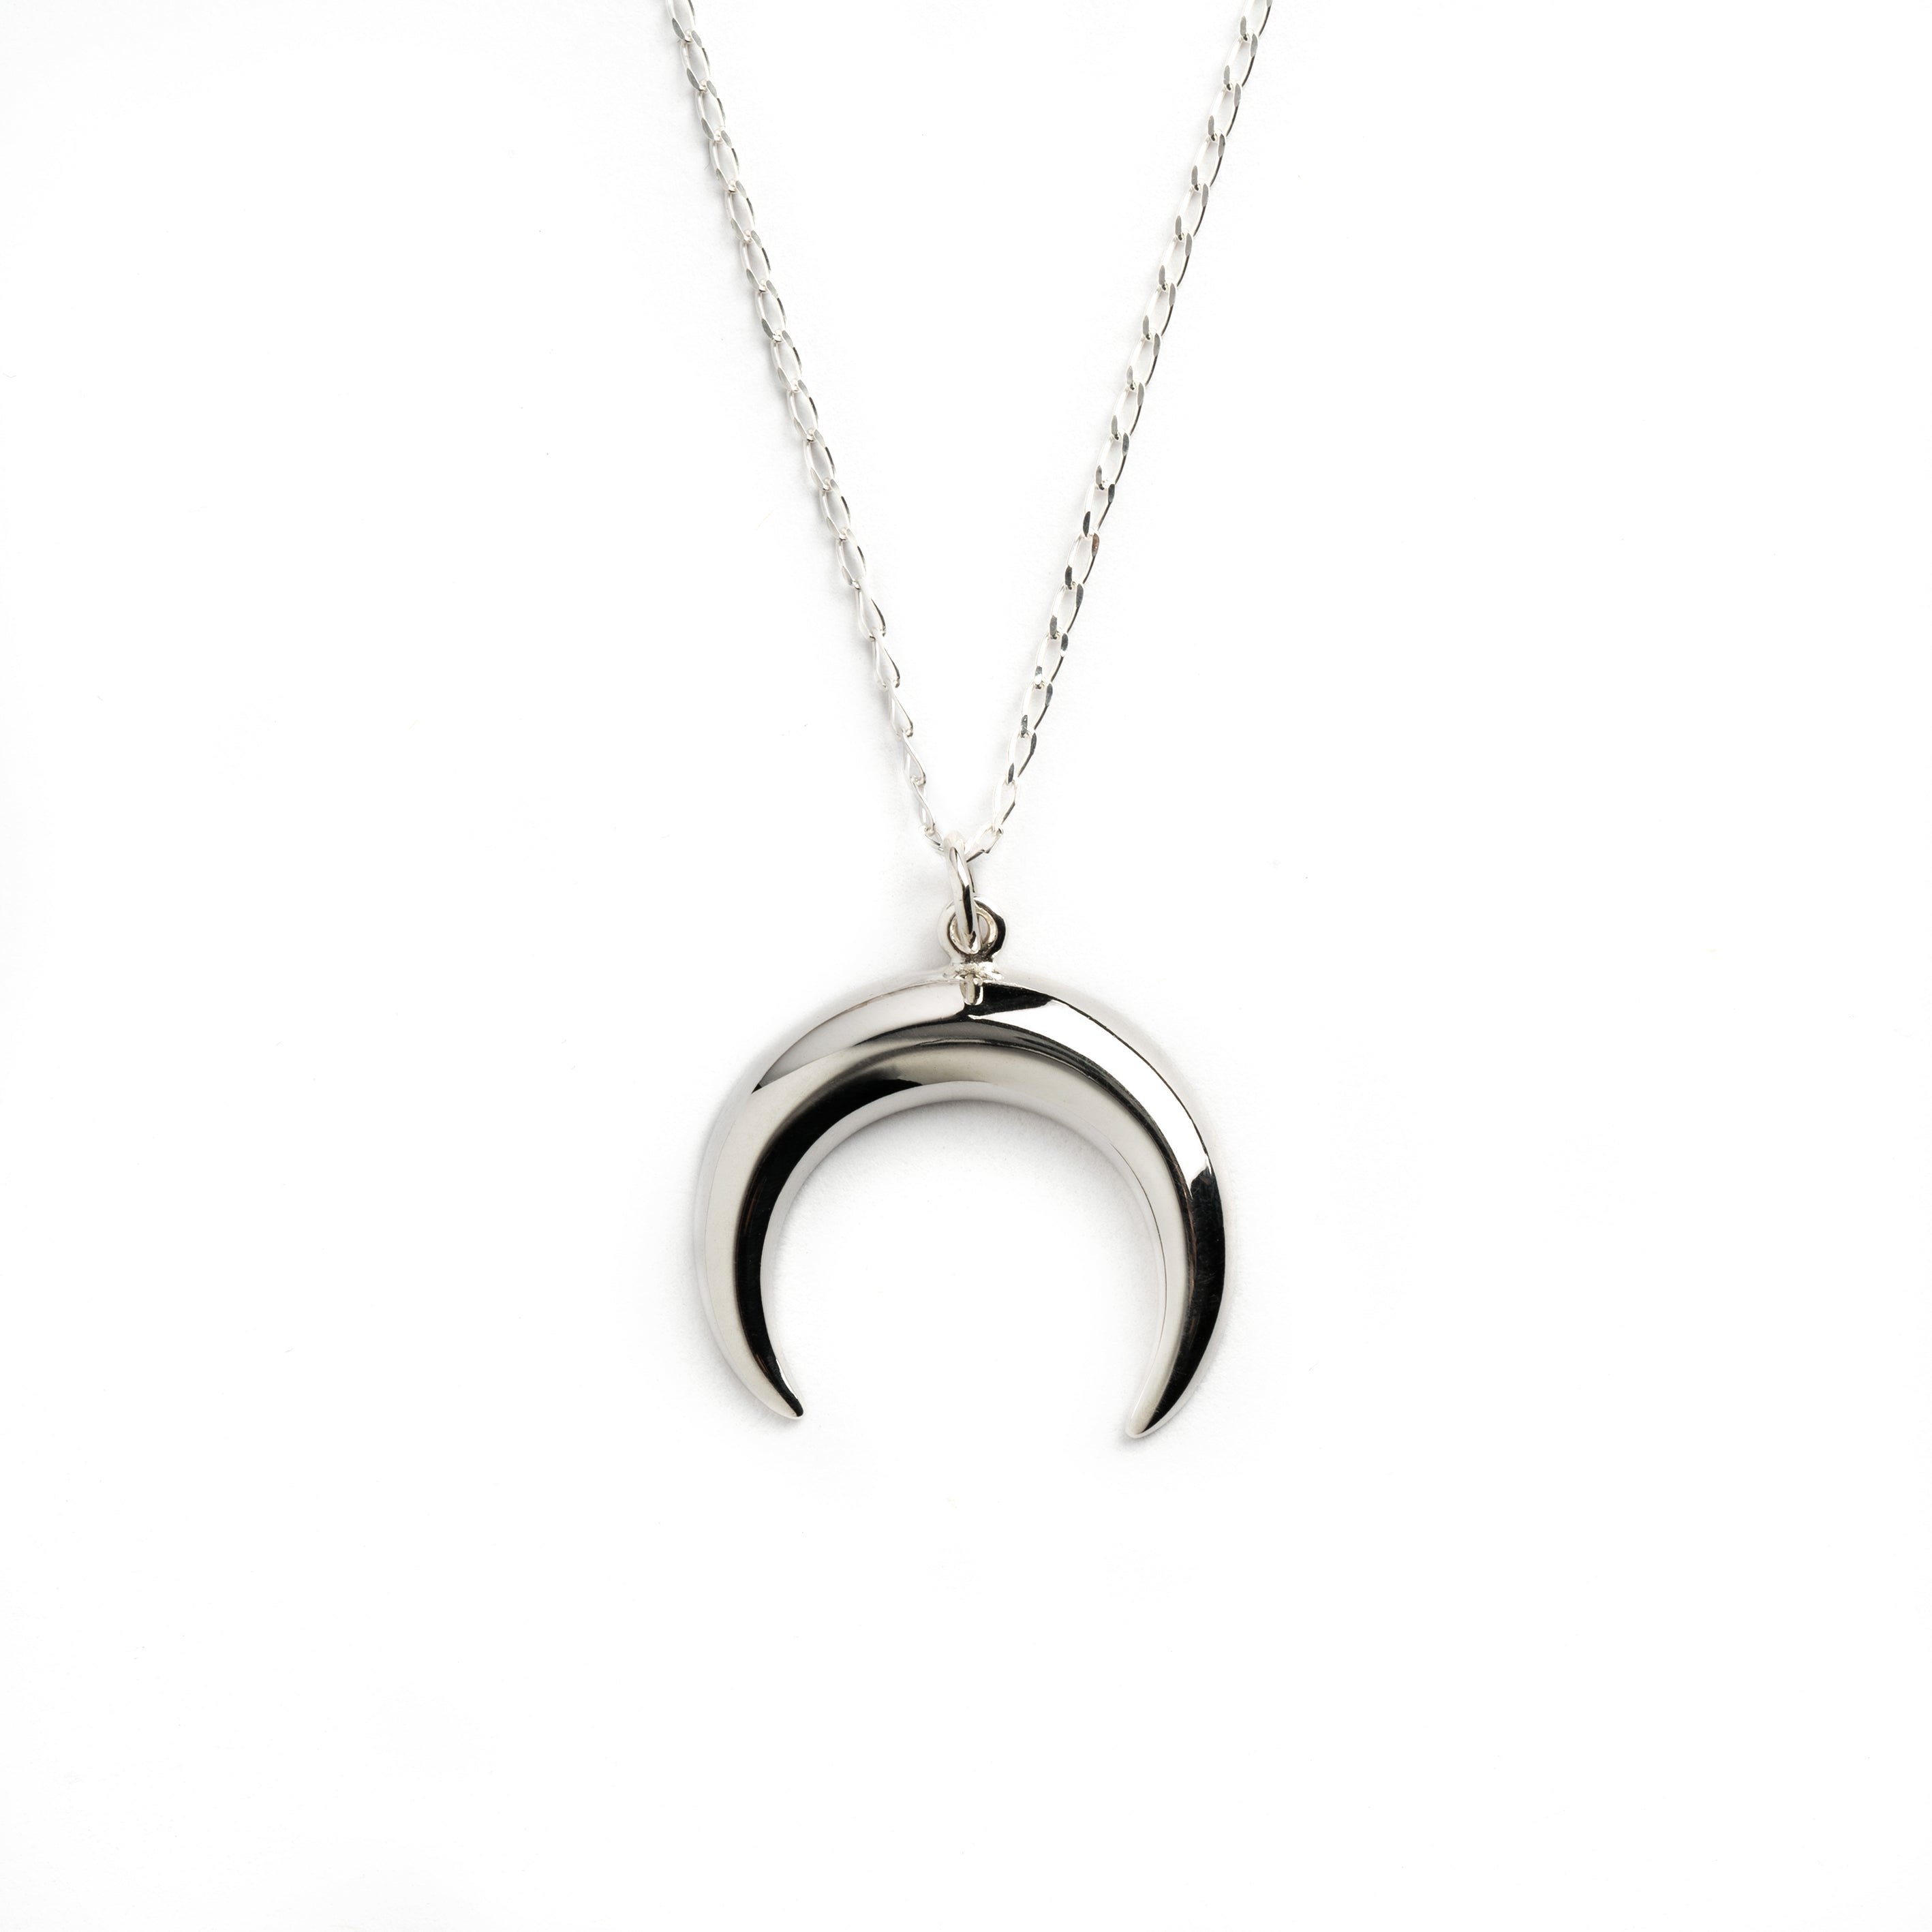 Silver crescent moon charm on a chain necklace frontal view